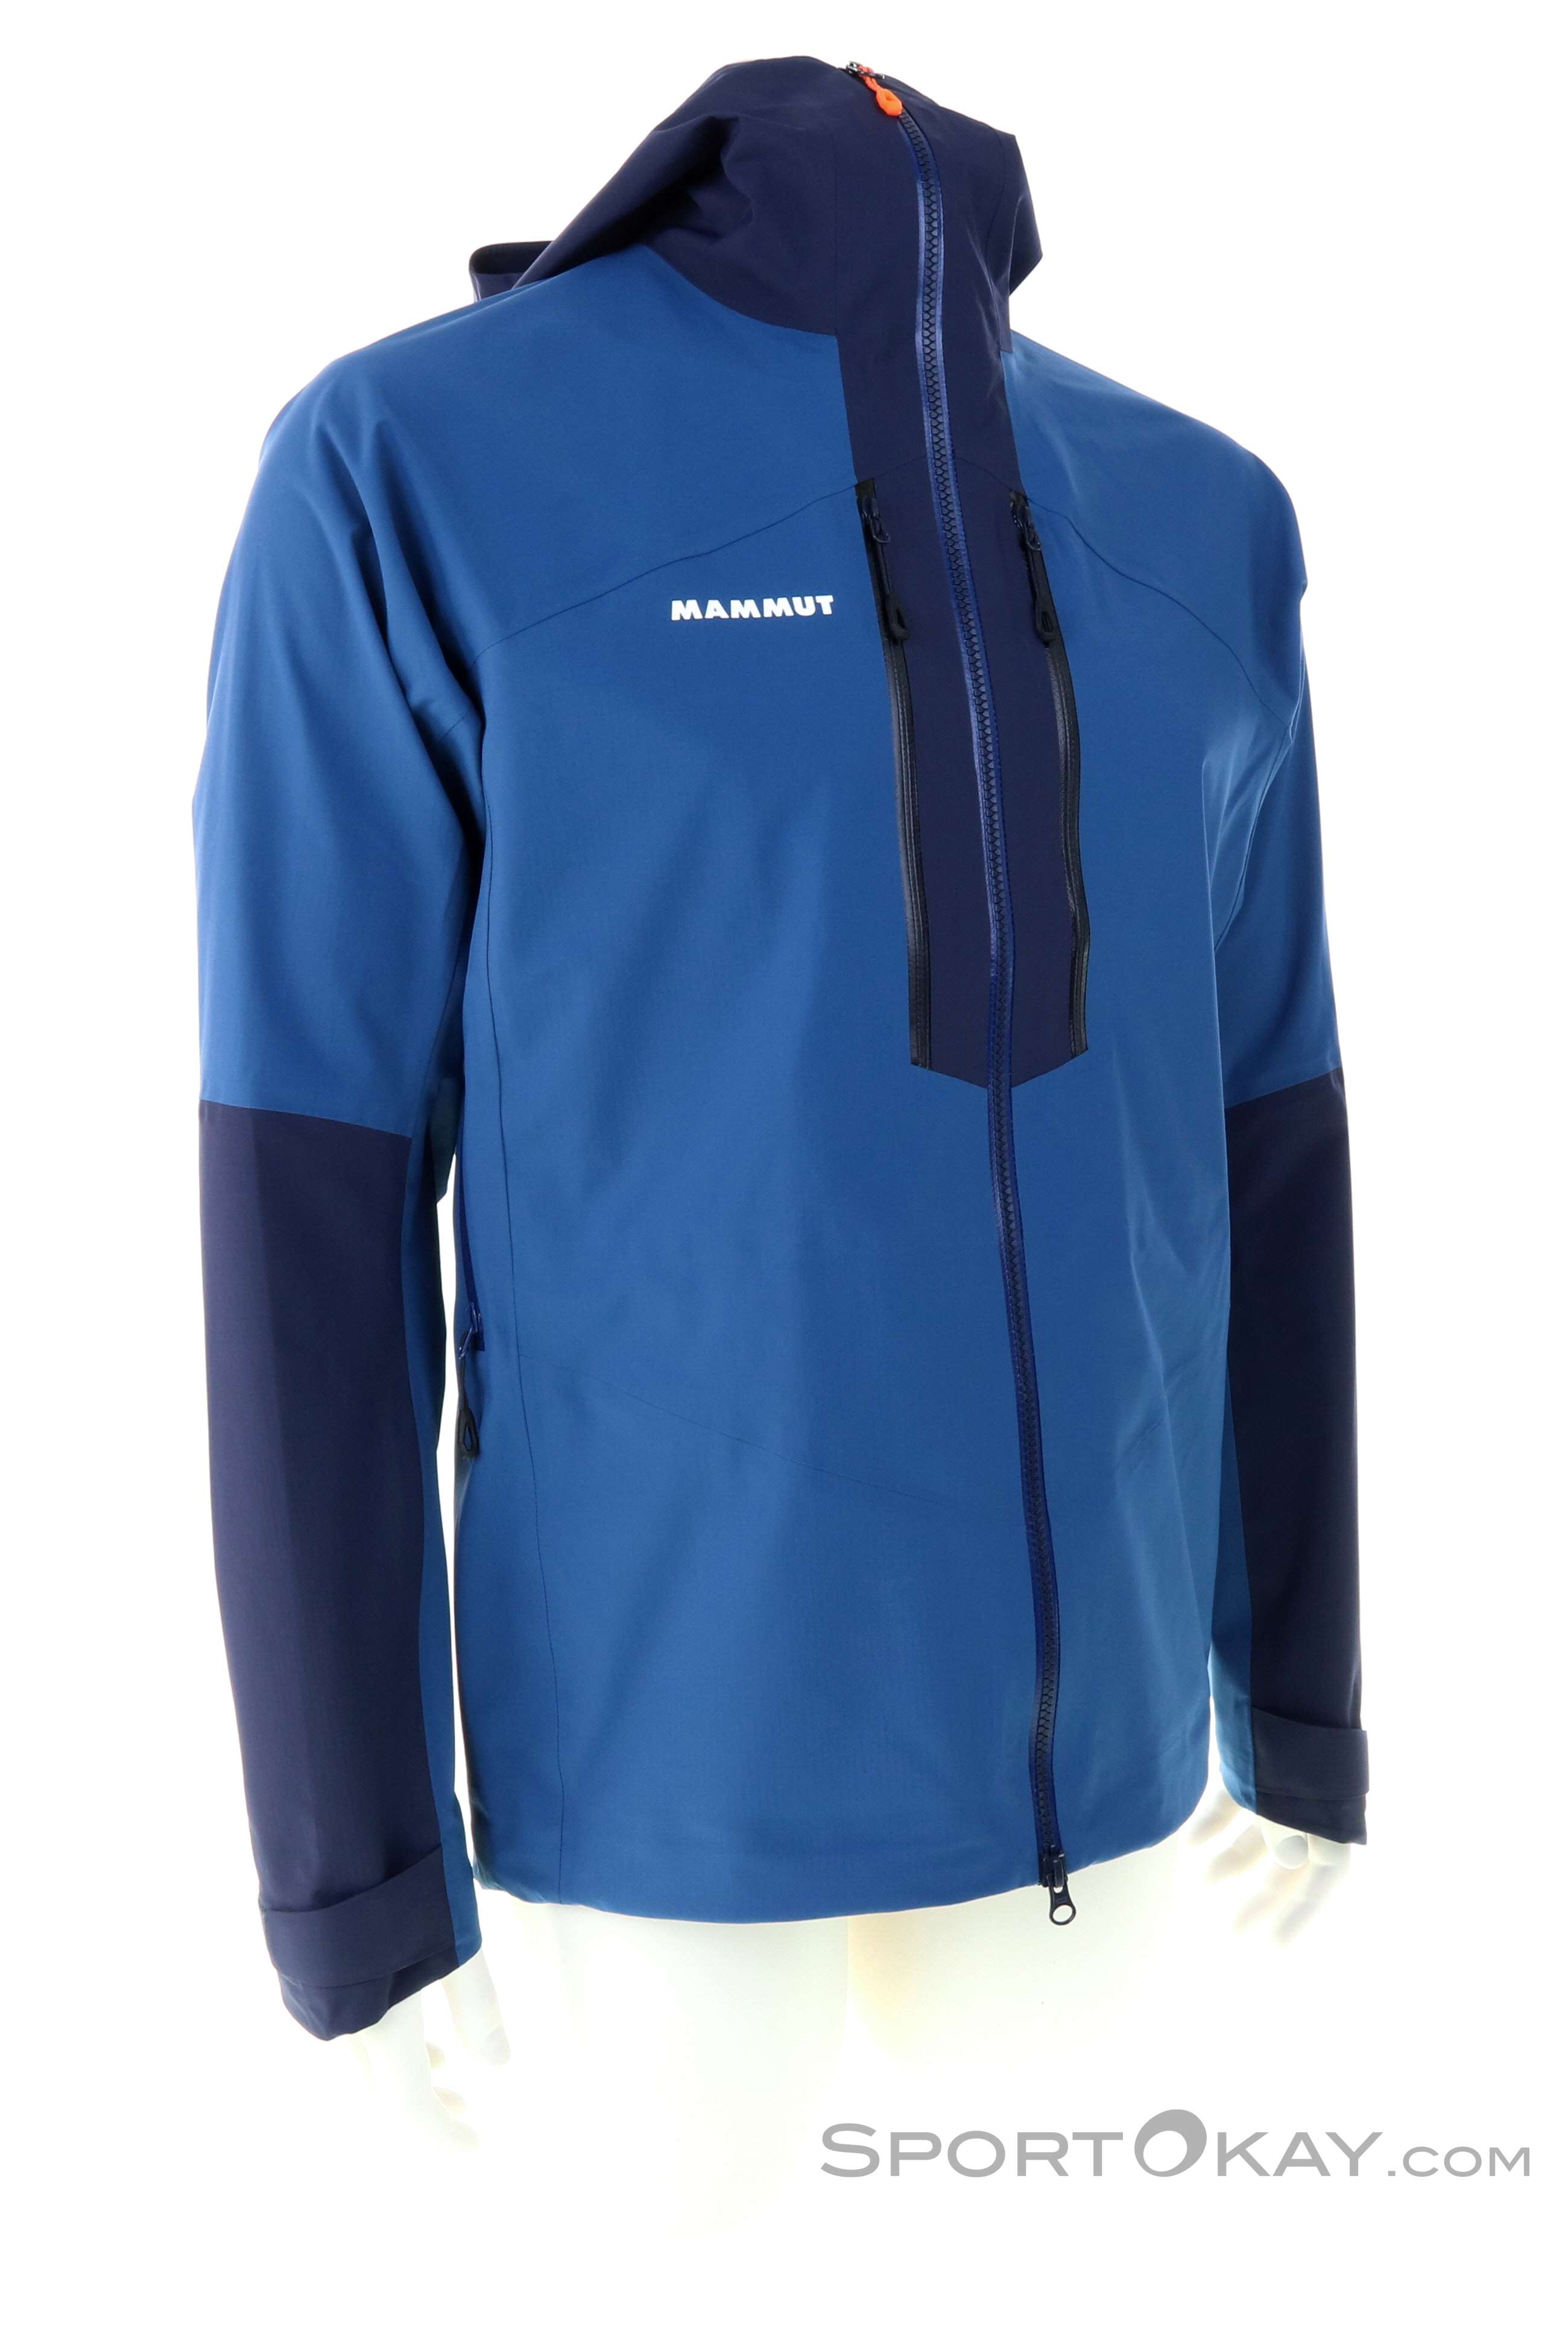 Mammut Taiss HS Mens Ski Touring Jacket - Jackets - Outdoor Clothing -  Outdoor - All